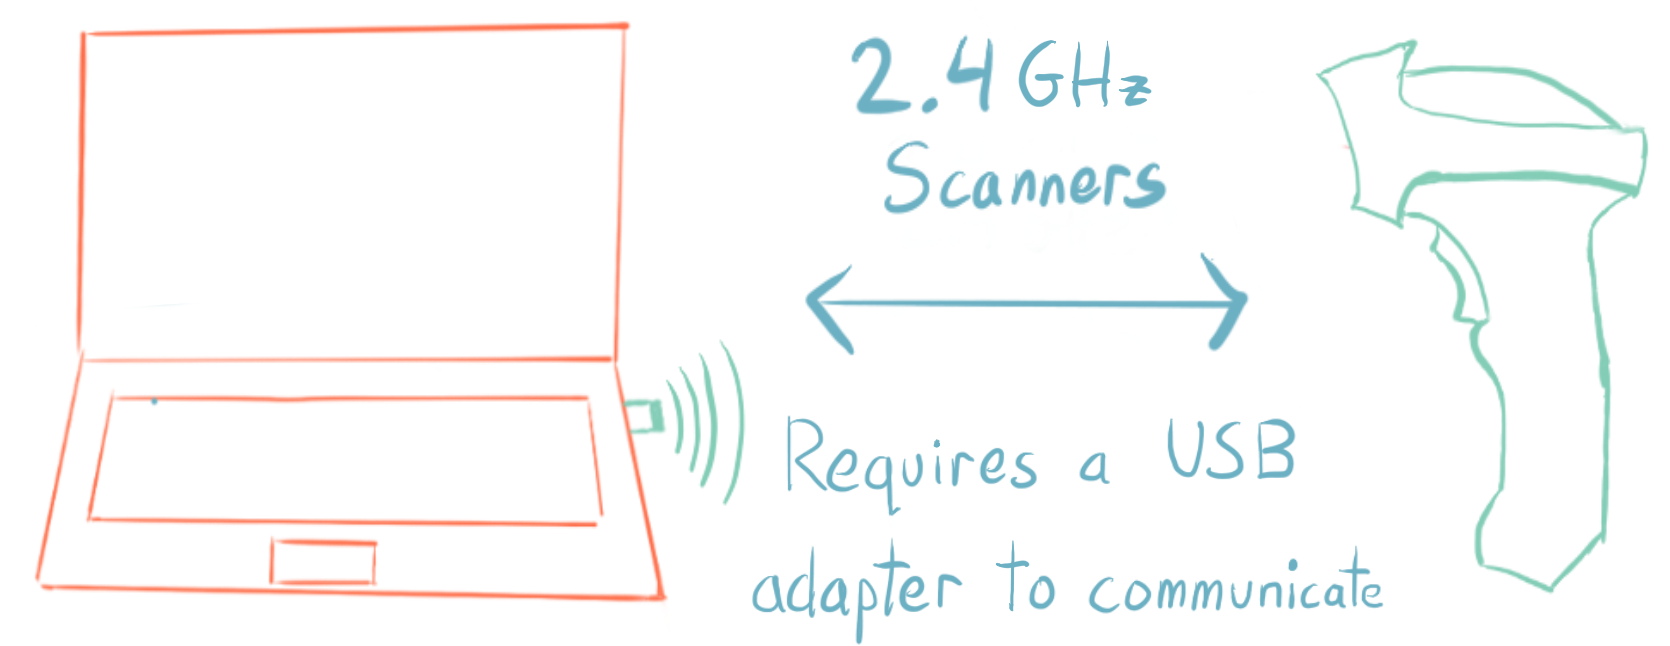 2.4 GHz Price Scanners require a USB adapter to communicate